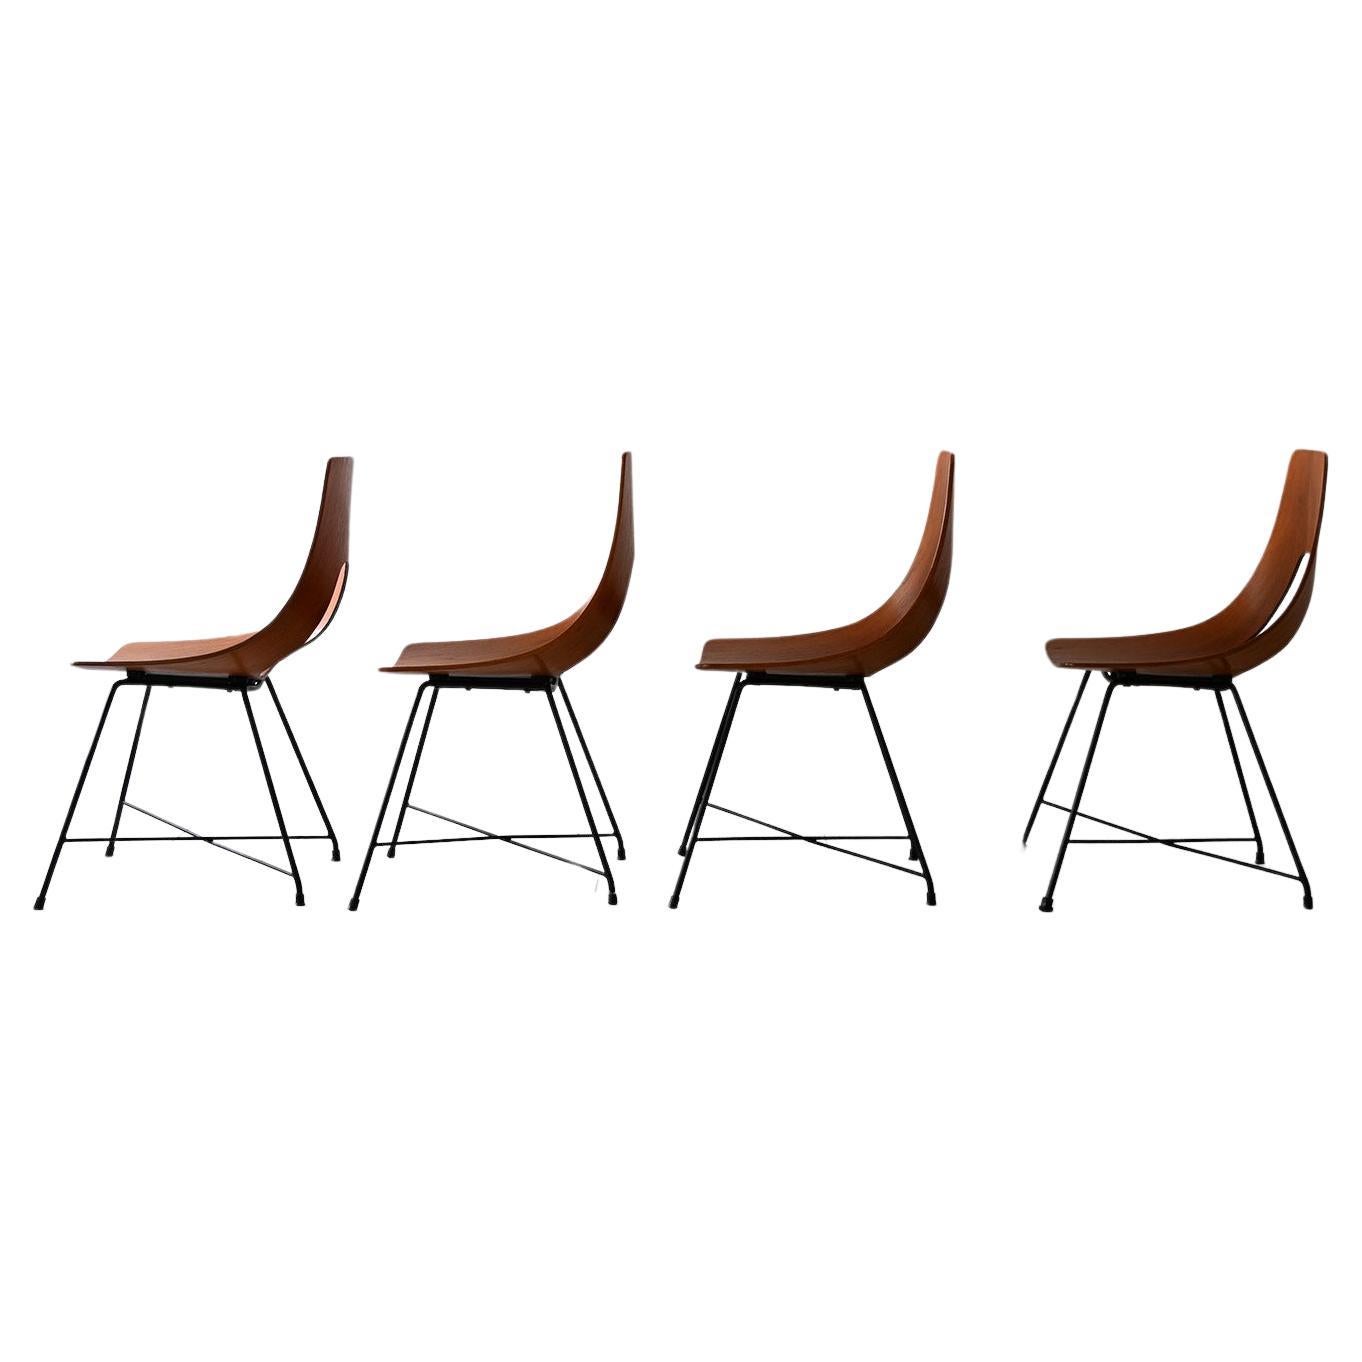 "Ariston" chairs by Augusto Bozzi For Sale